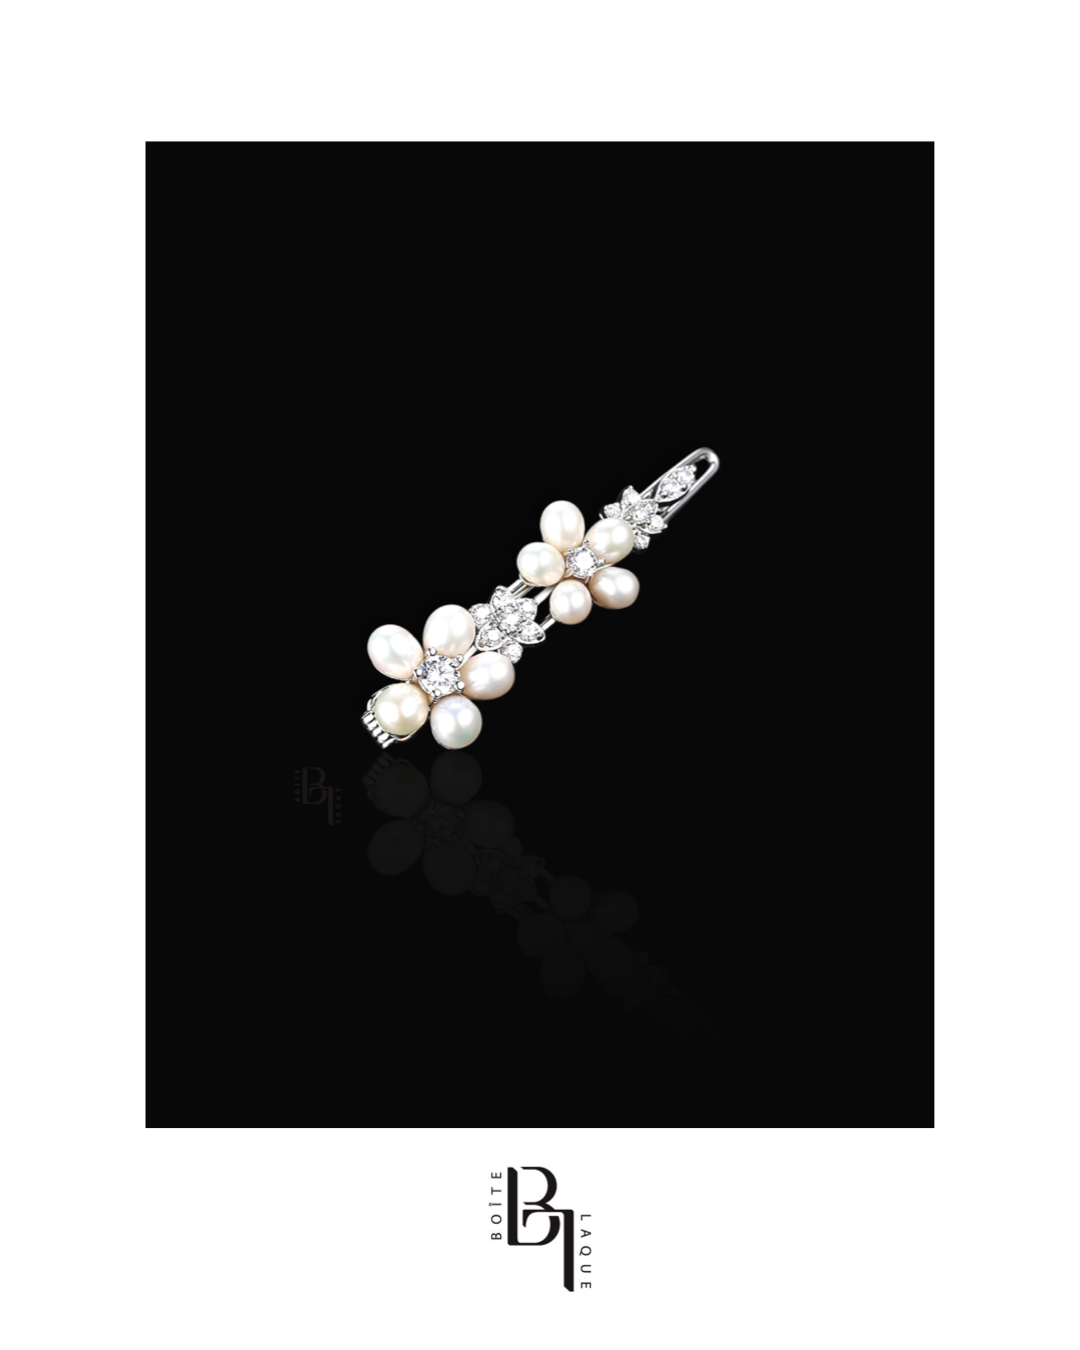 Bridal Freshwater Pearls 14k White Gold Hair Pin with Set of Signature Silver Bobby Pins